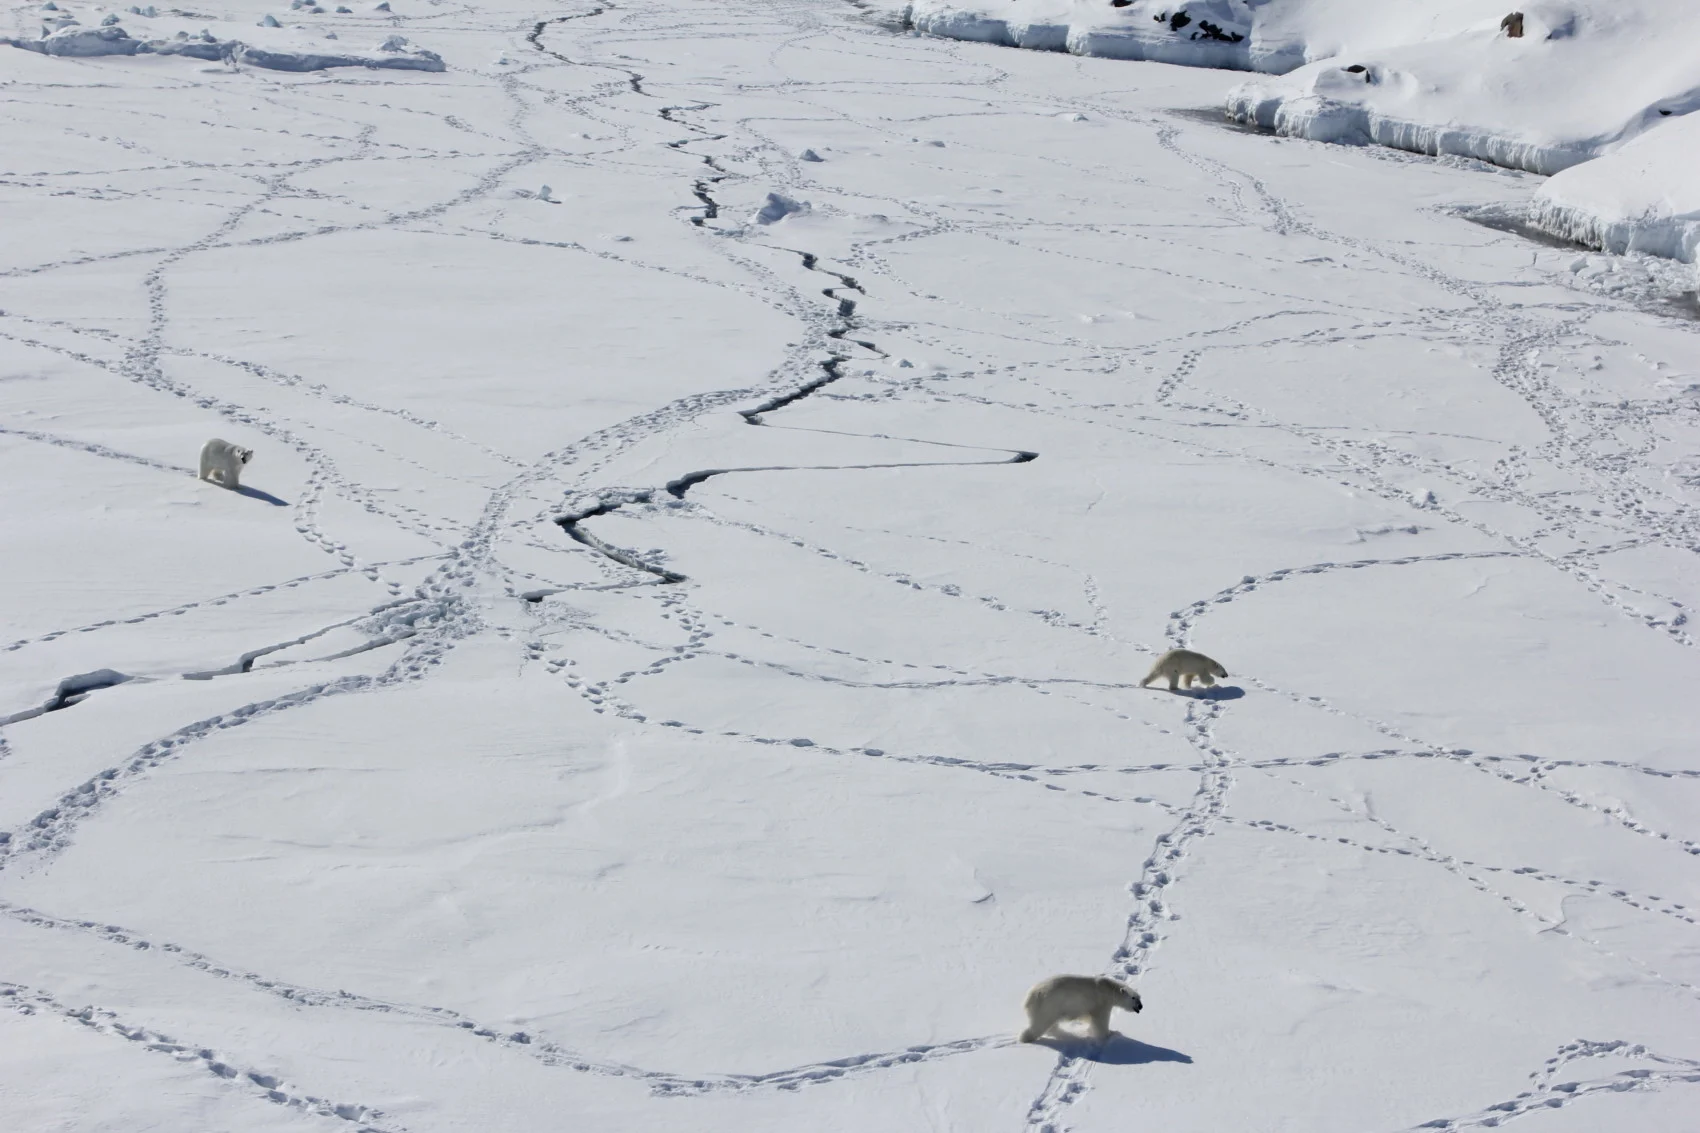 Three adult polar bears in Southeast Greenland in April 2015 using the sea ice during the limited time when it is available. (Kristin Laidre/ University of Washington)